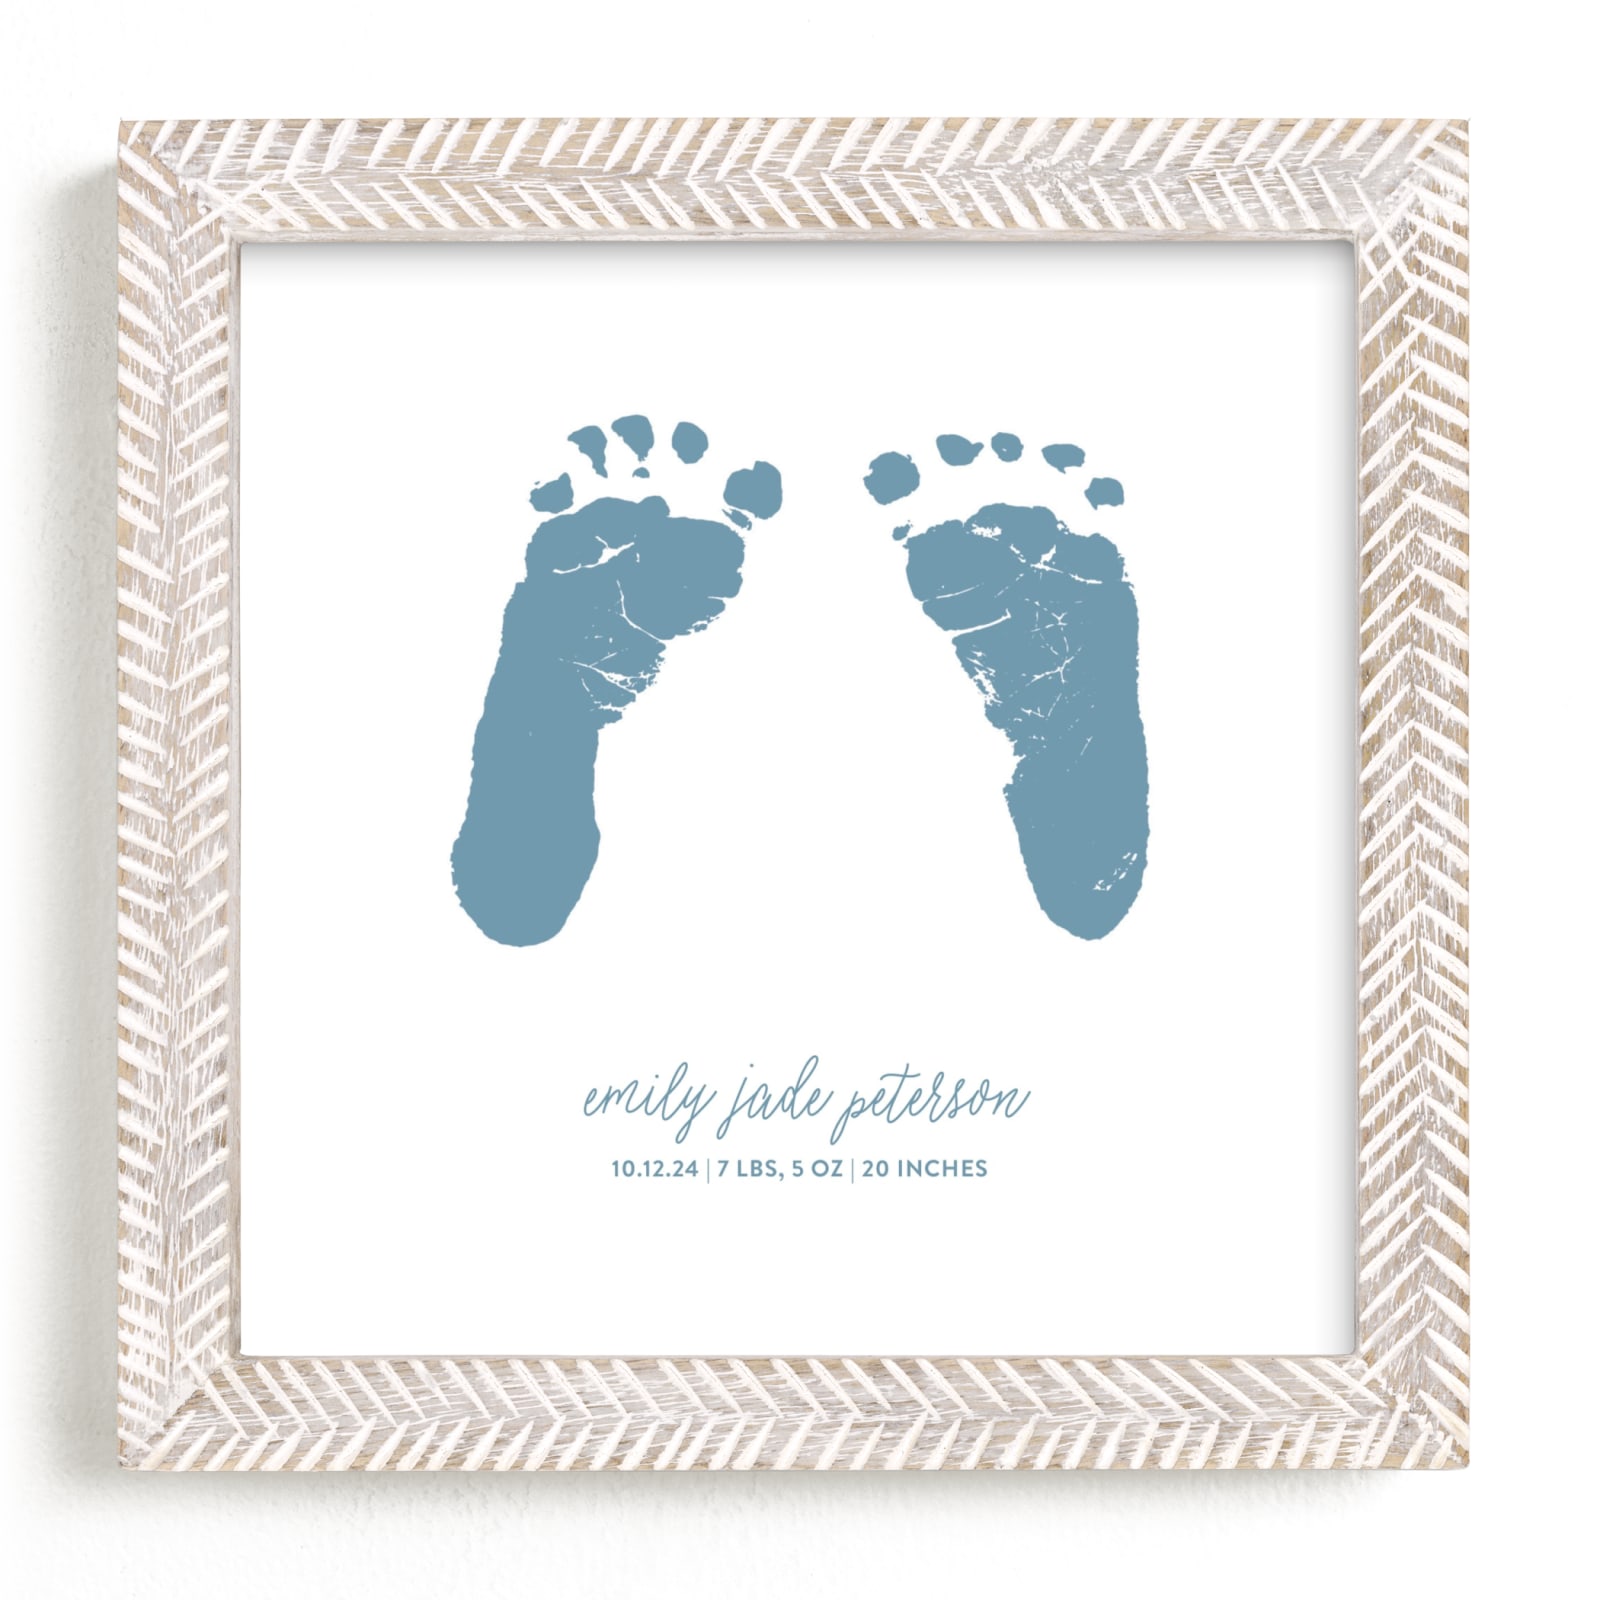 "Custom Footprints Letterpress Art" - Completely Custom Letterpress Art by Minted Custom in beautiful frame options and a variety of sizes.